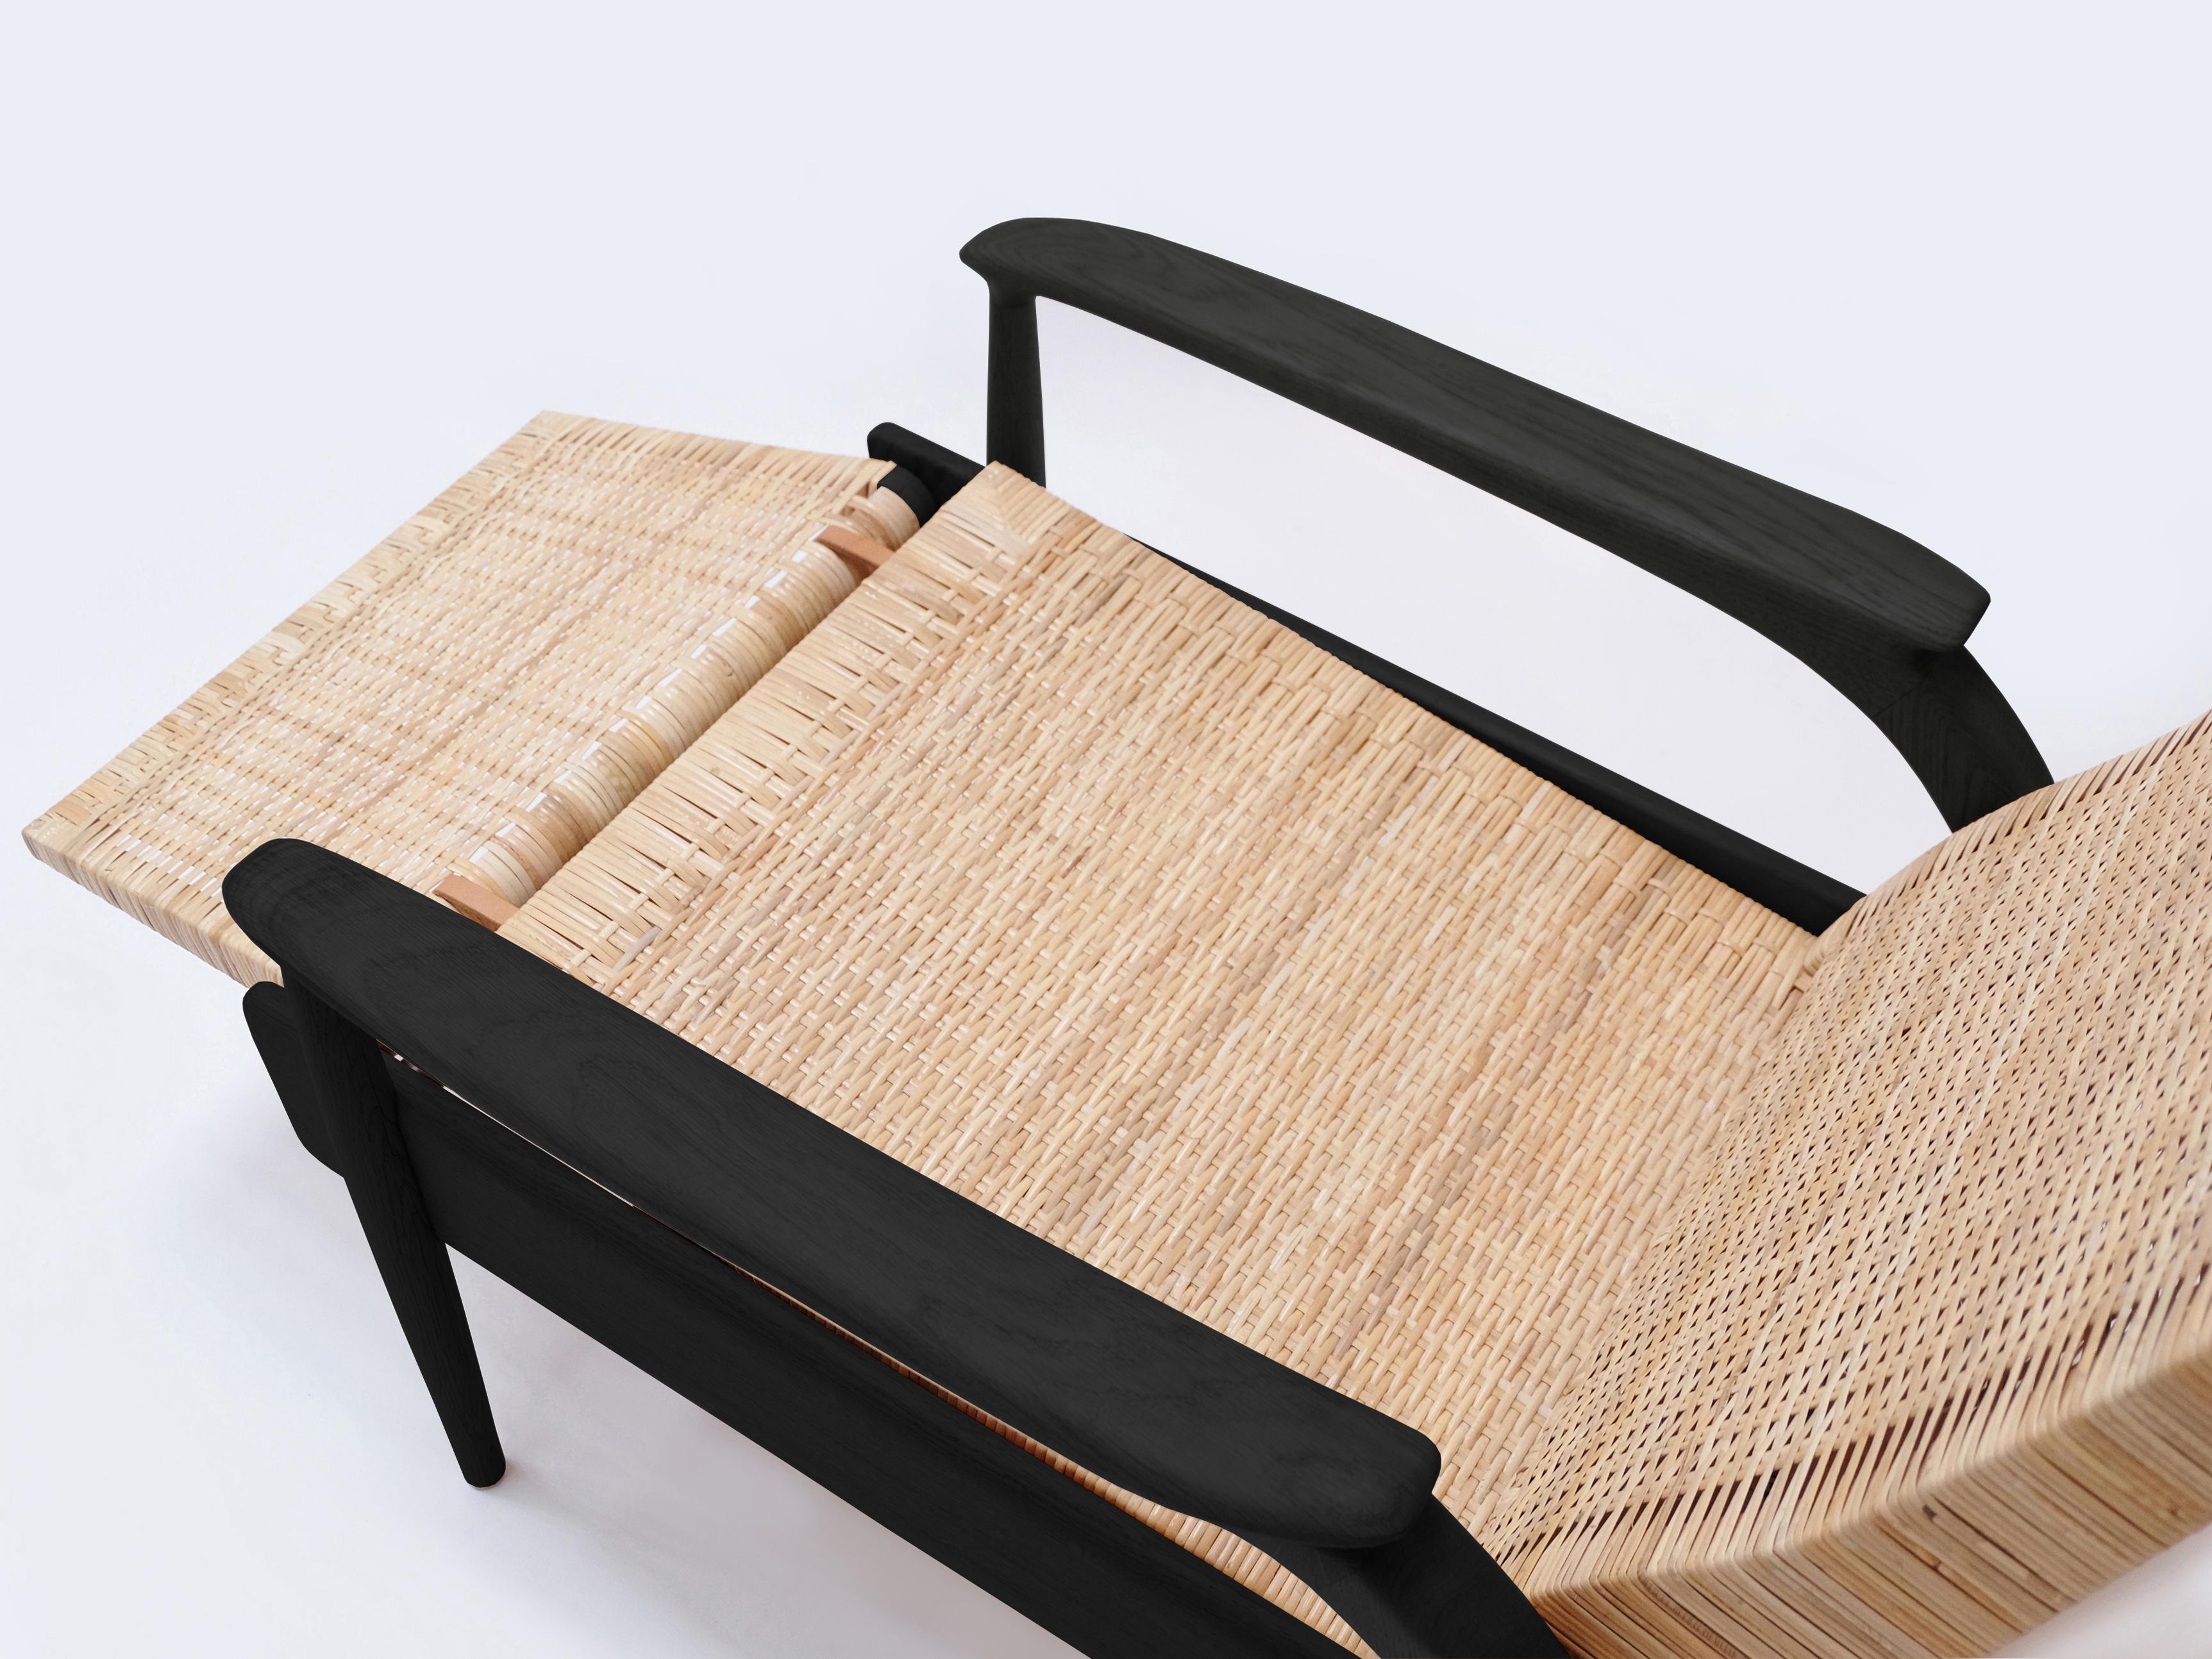 Custom-Made Handcrafted Reclining Eco Lounge Chairs FENDRIK by Studio180degree
Shown in Sustainable Solid Natural blackened Oak and Natural Undyed Cane

Noble - Tactile – Refined - Sustainable
Reclining Eco Lounge Chair FENDRIK is a noble Eco Lounge